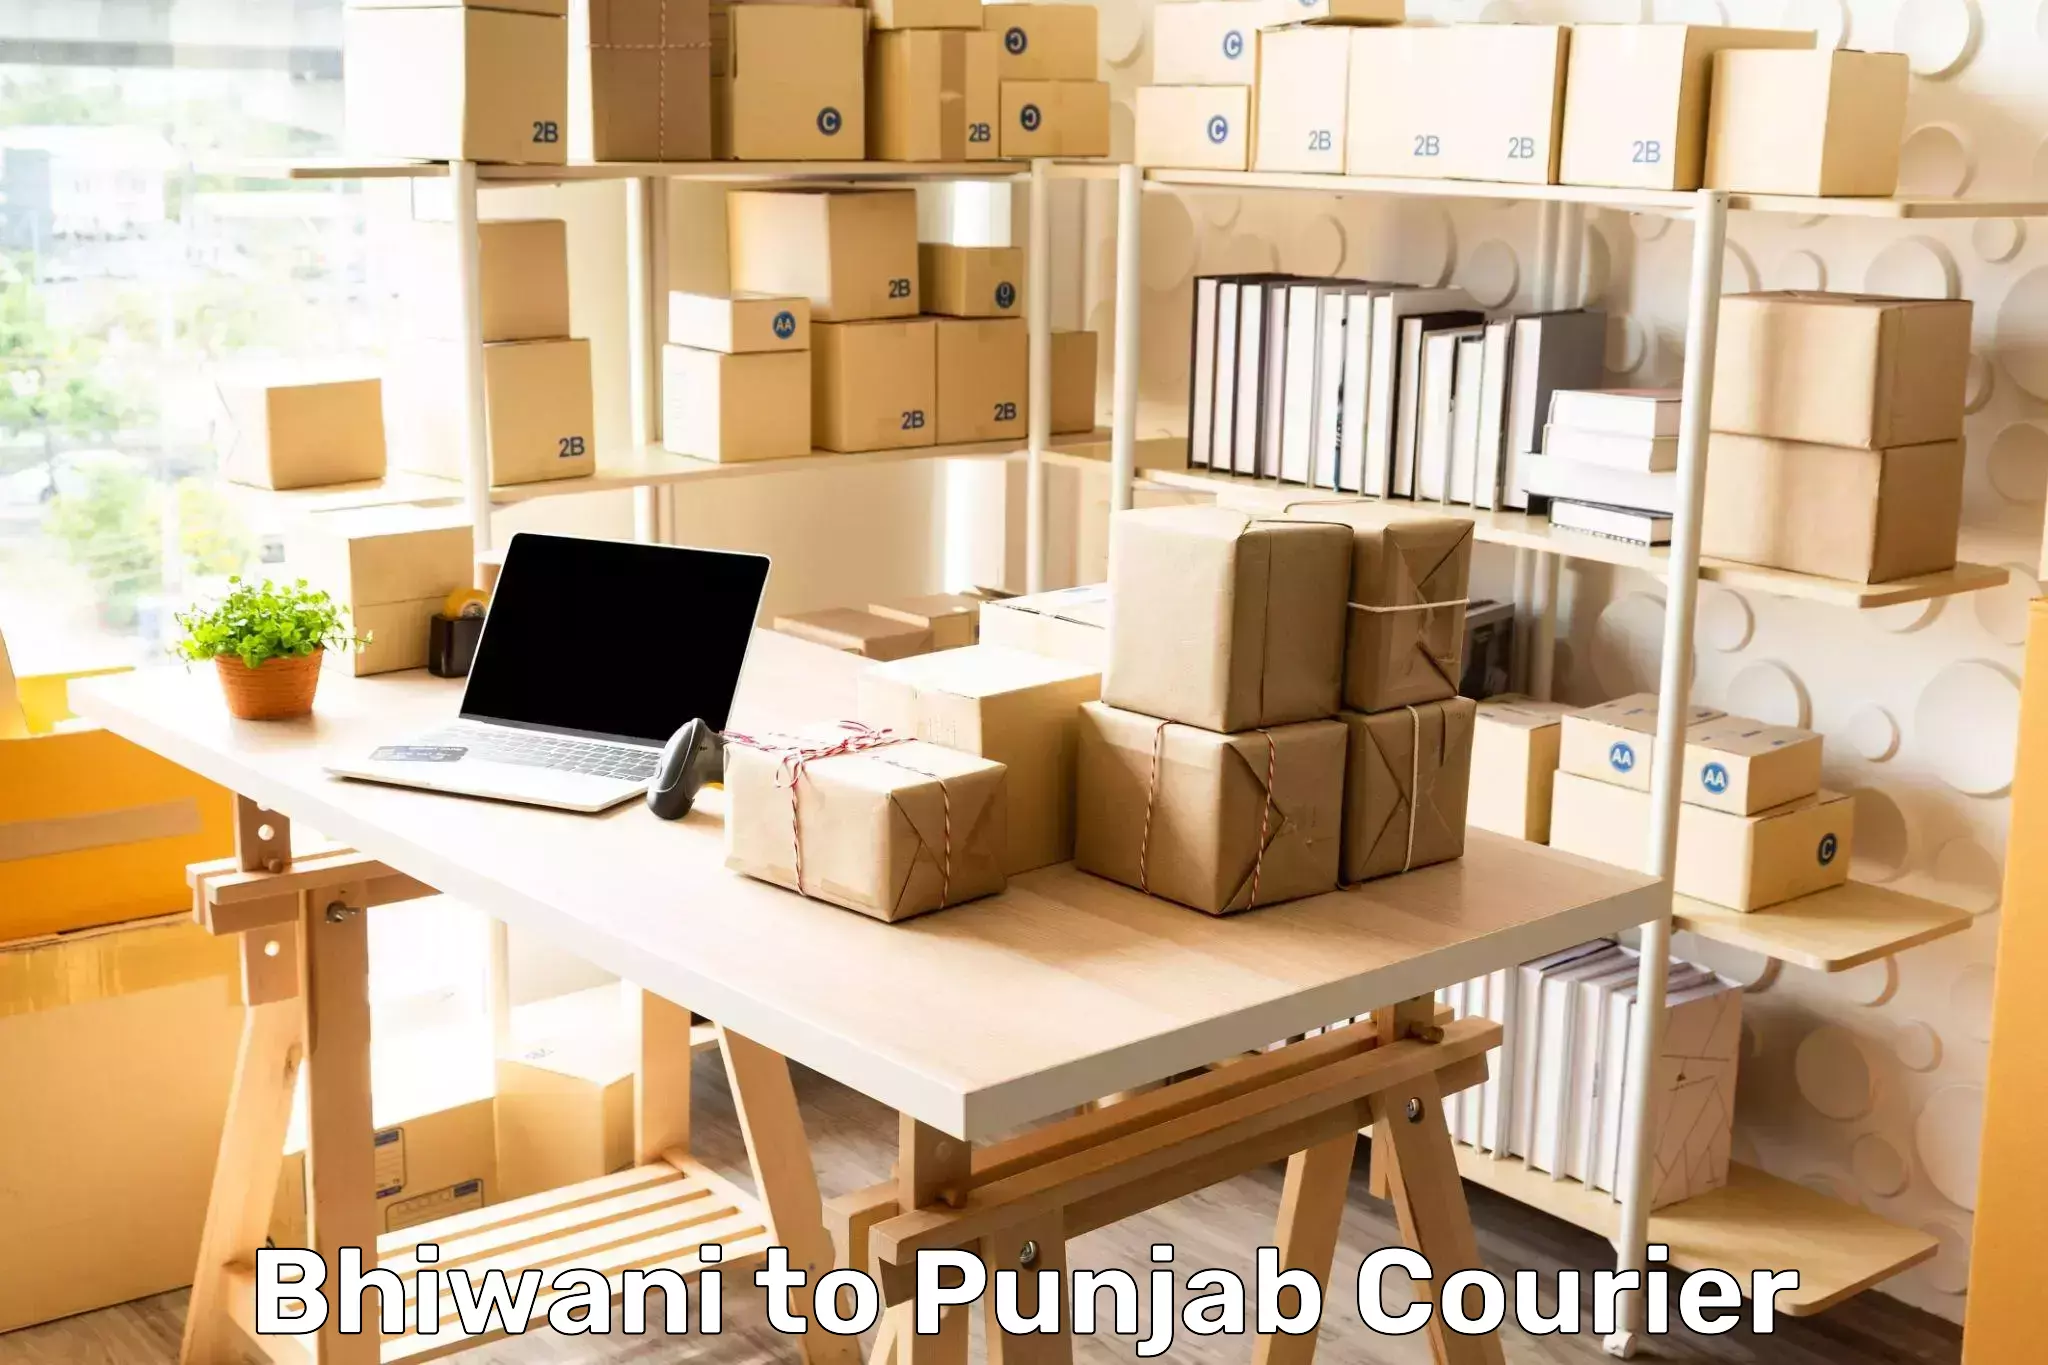 Scheduled delivery in Bhiwani to Punjab